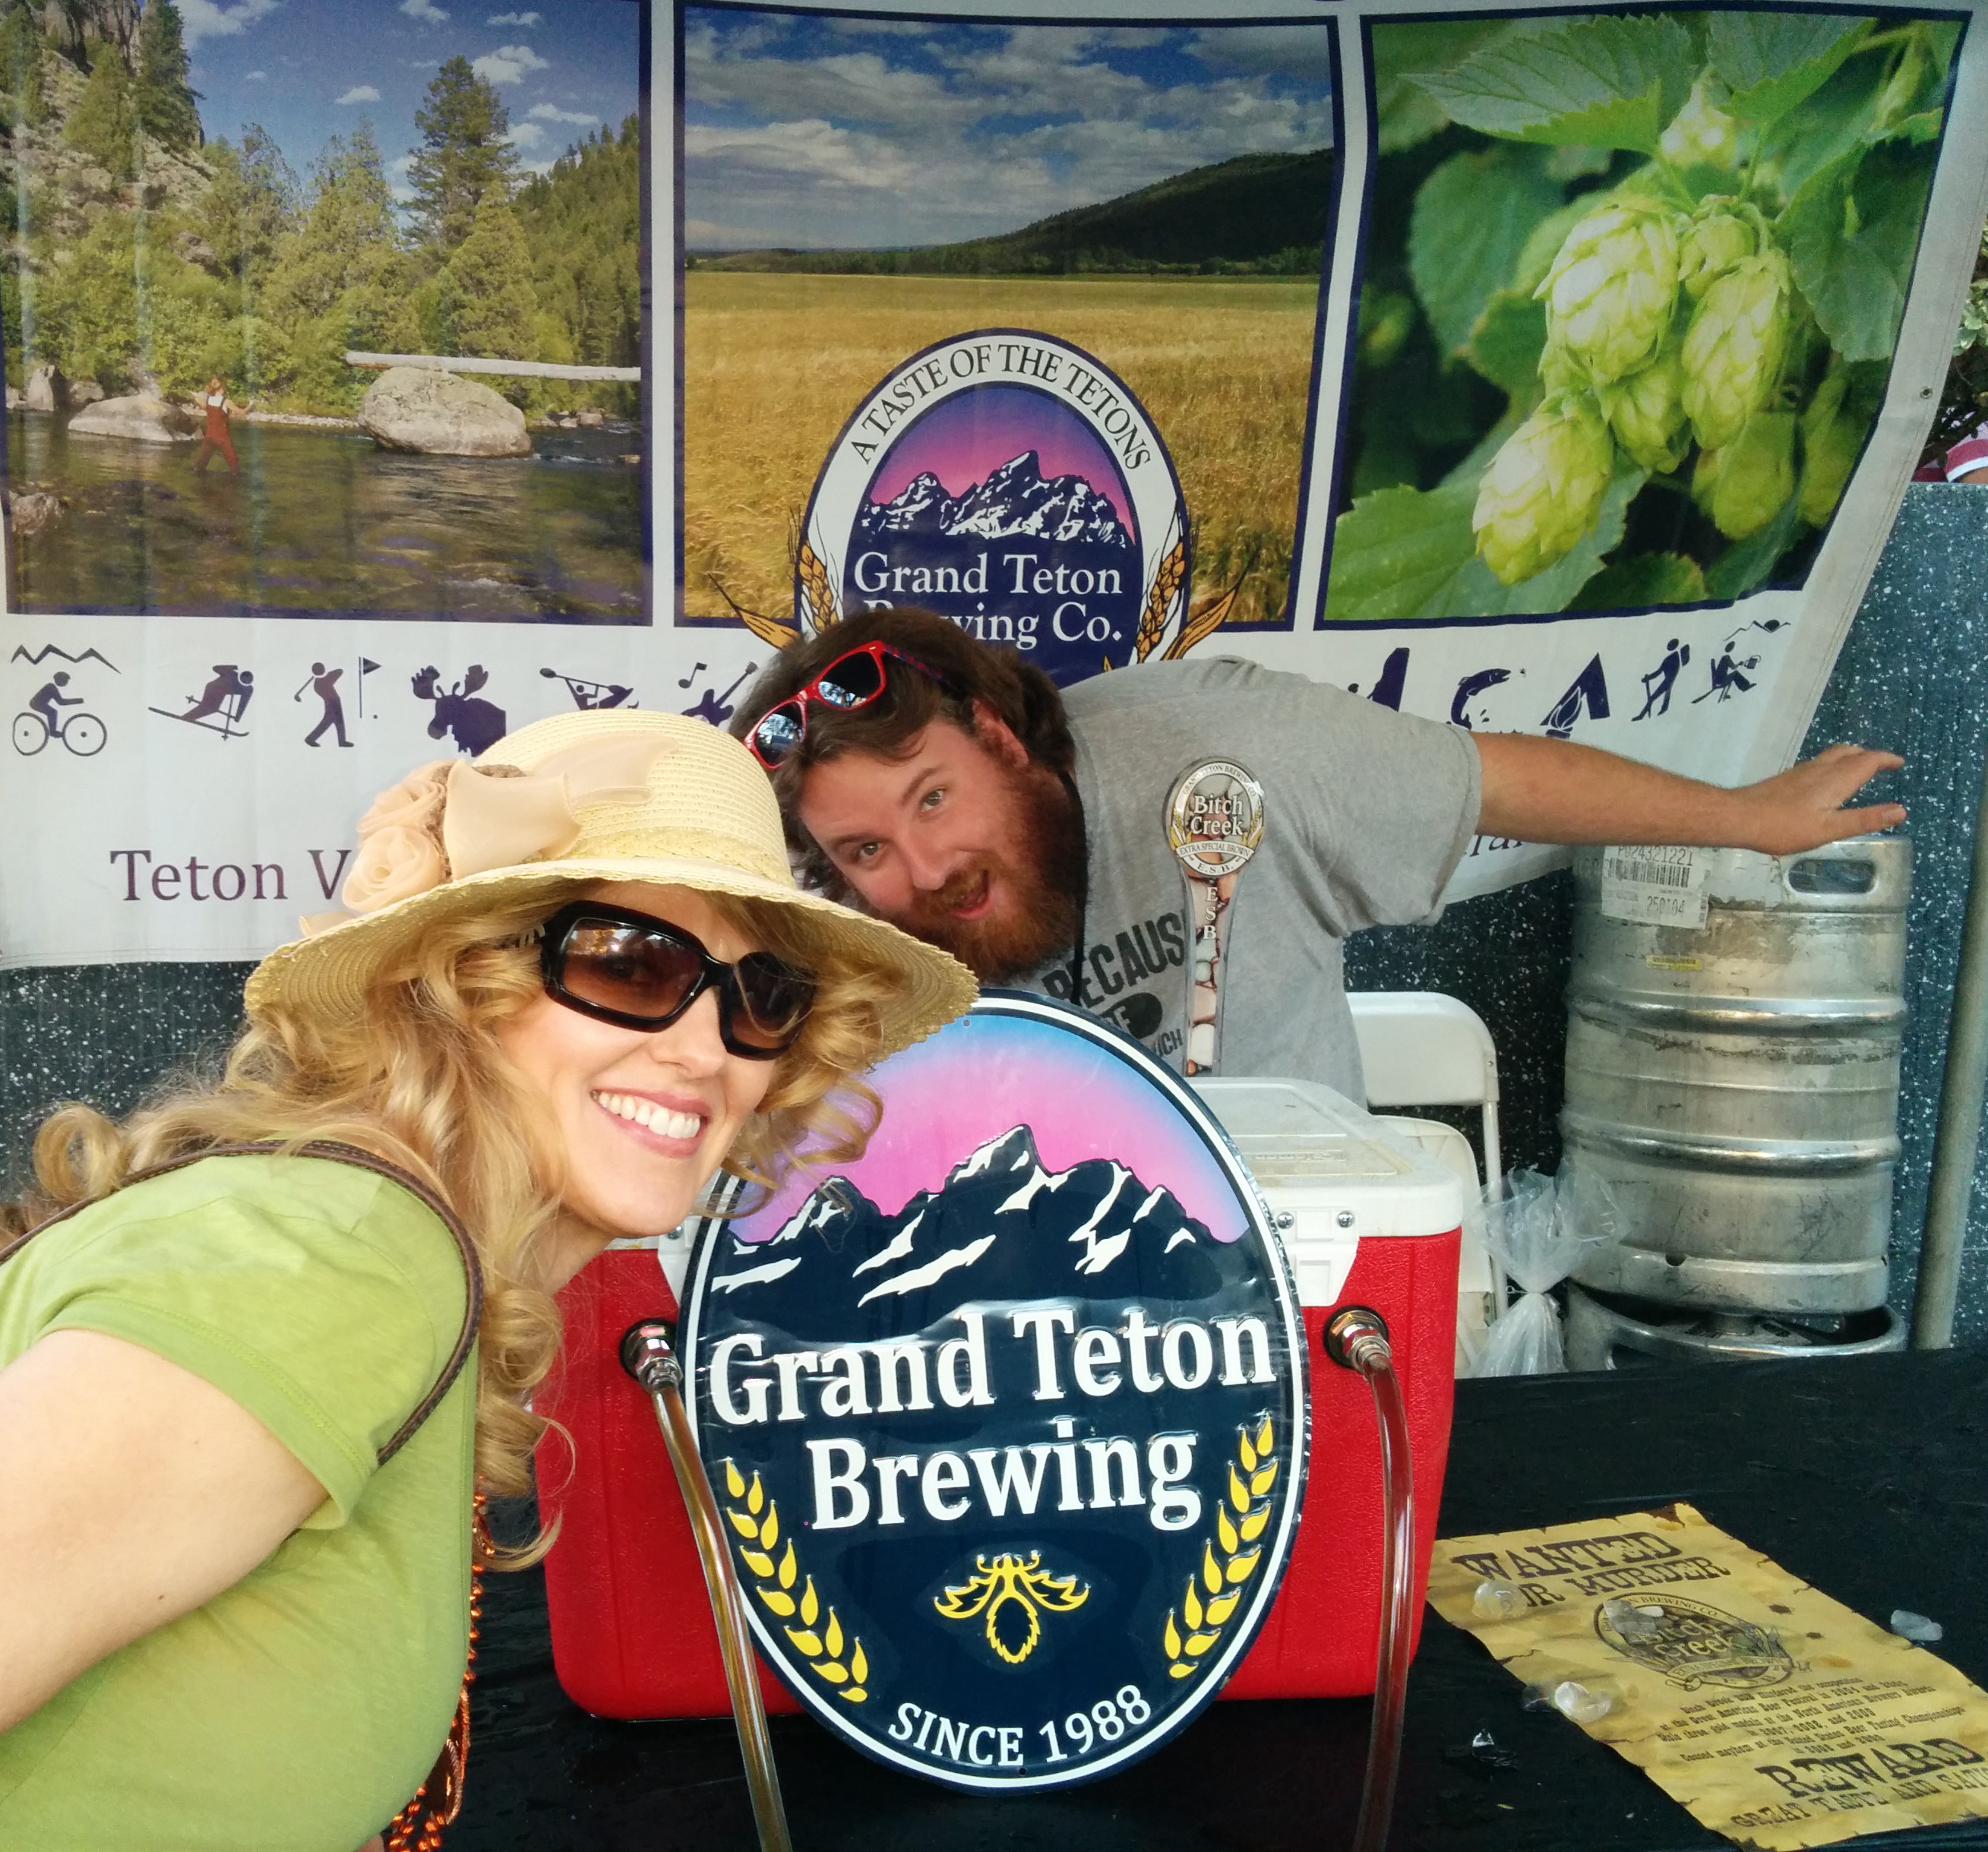 Jolie Franz visiting the Grand Teton Brewing Co booth at the Los Angeles Beer Festival DTLA.